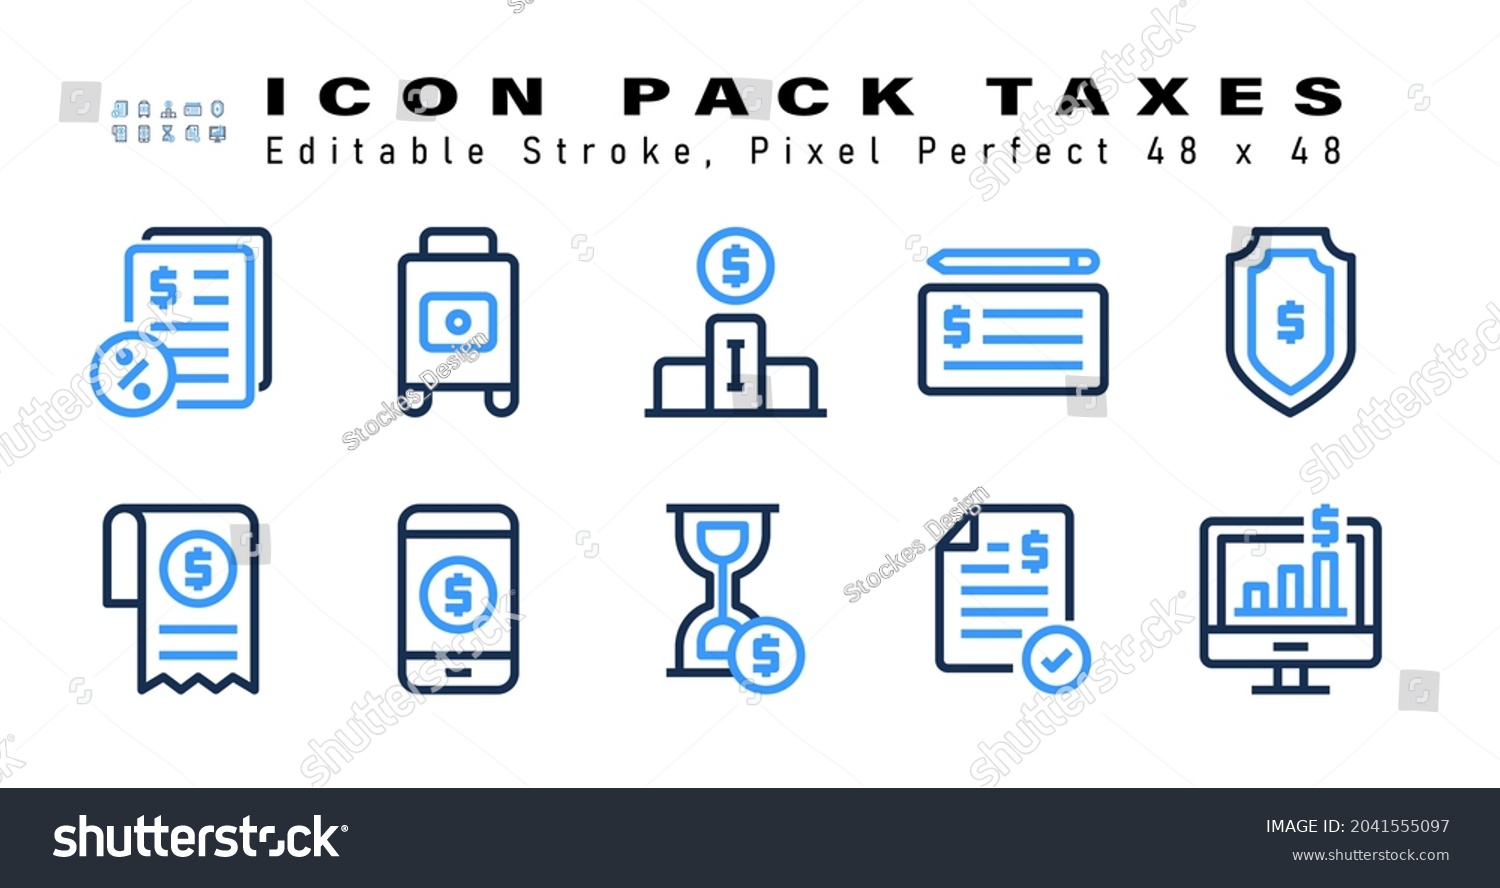 SVG of Icon Set of Taxes Two Color Icons. Contains such Icons as Money Secure, Bill, Online Shop, Time Is Money etc. Editable Stroke. 48 x 48 Pixel Perfect svg